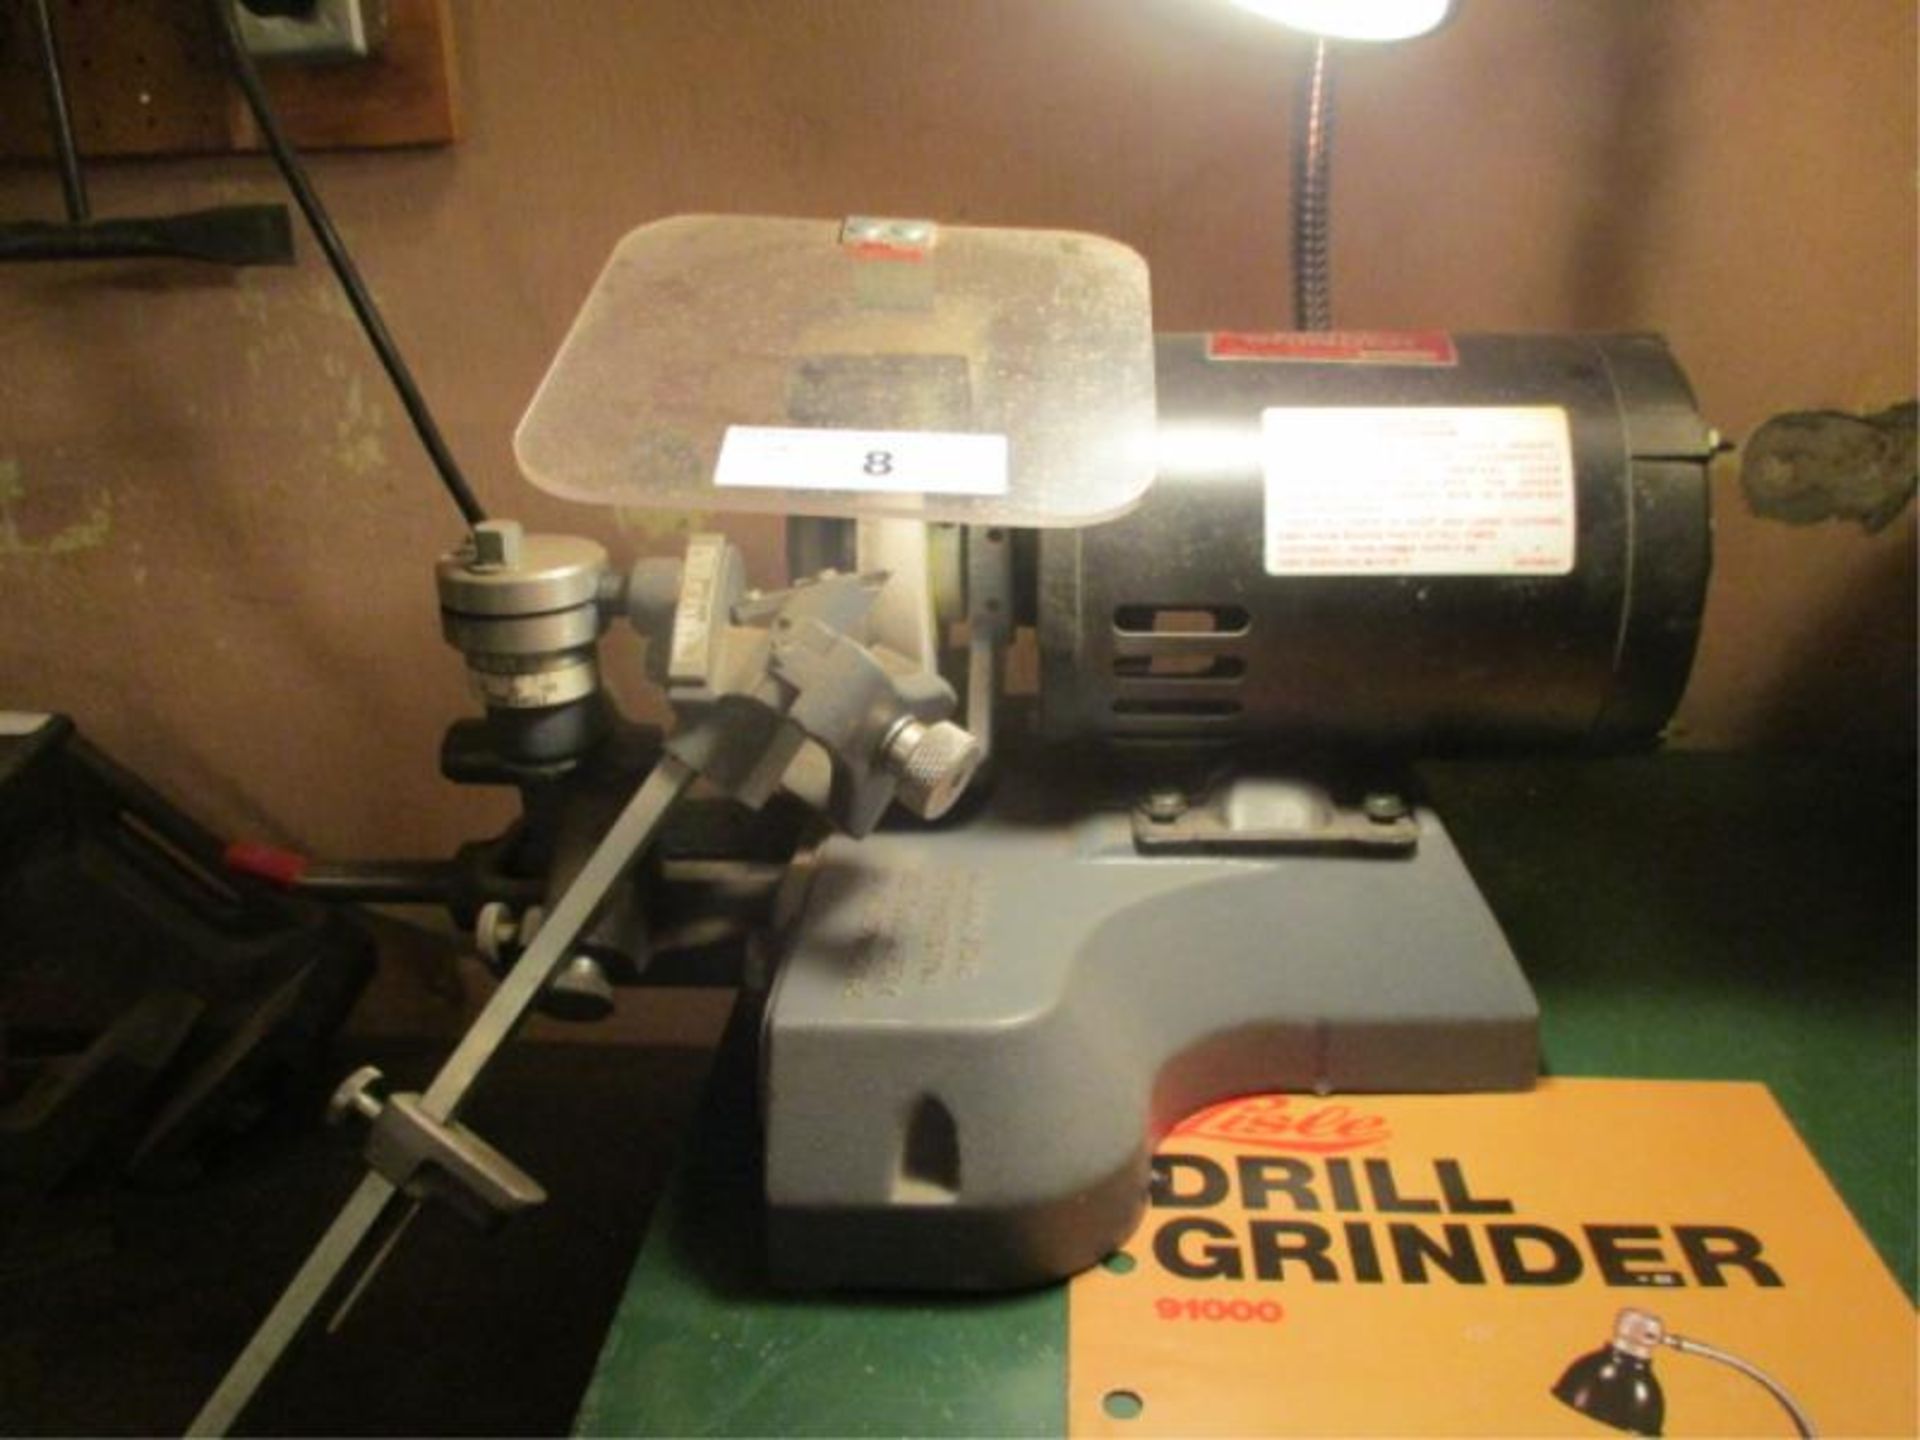 Drill Grinder, By Lisle, Model: 91000 - Image 2 of 3